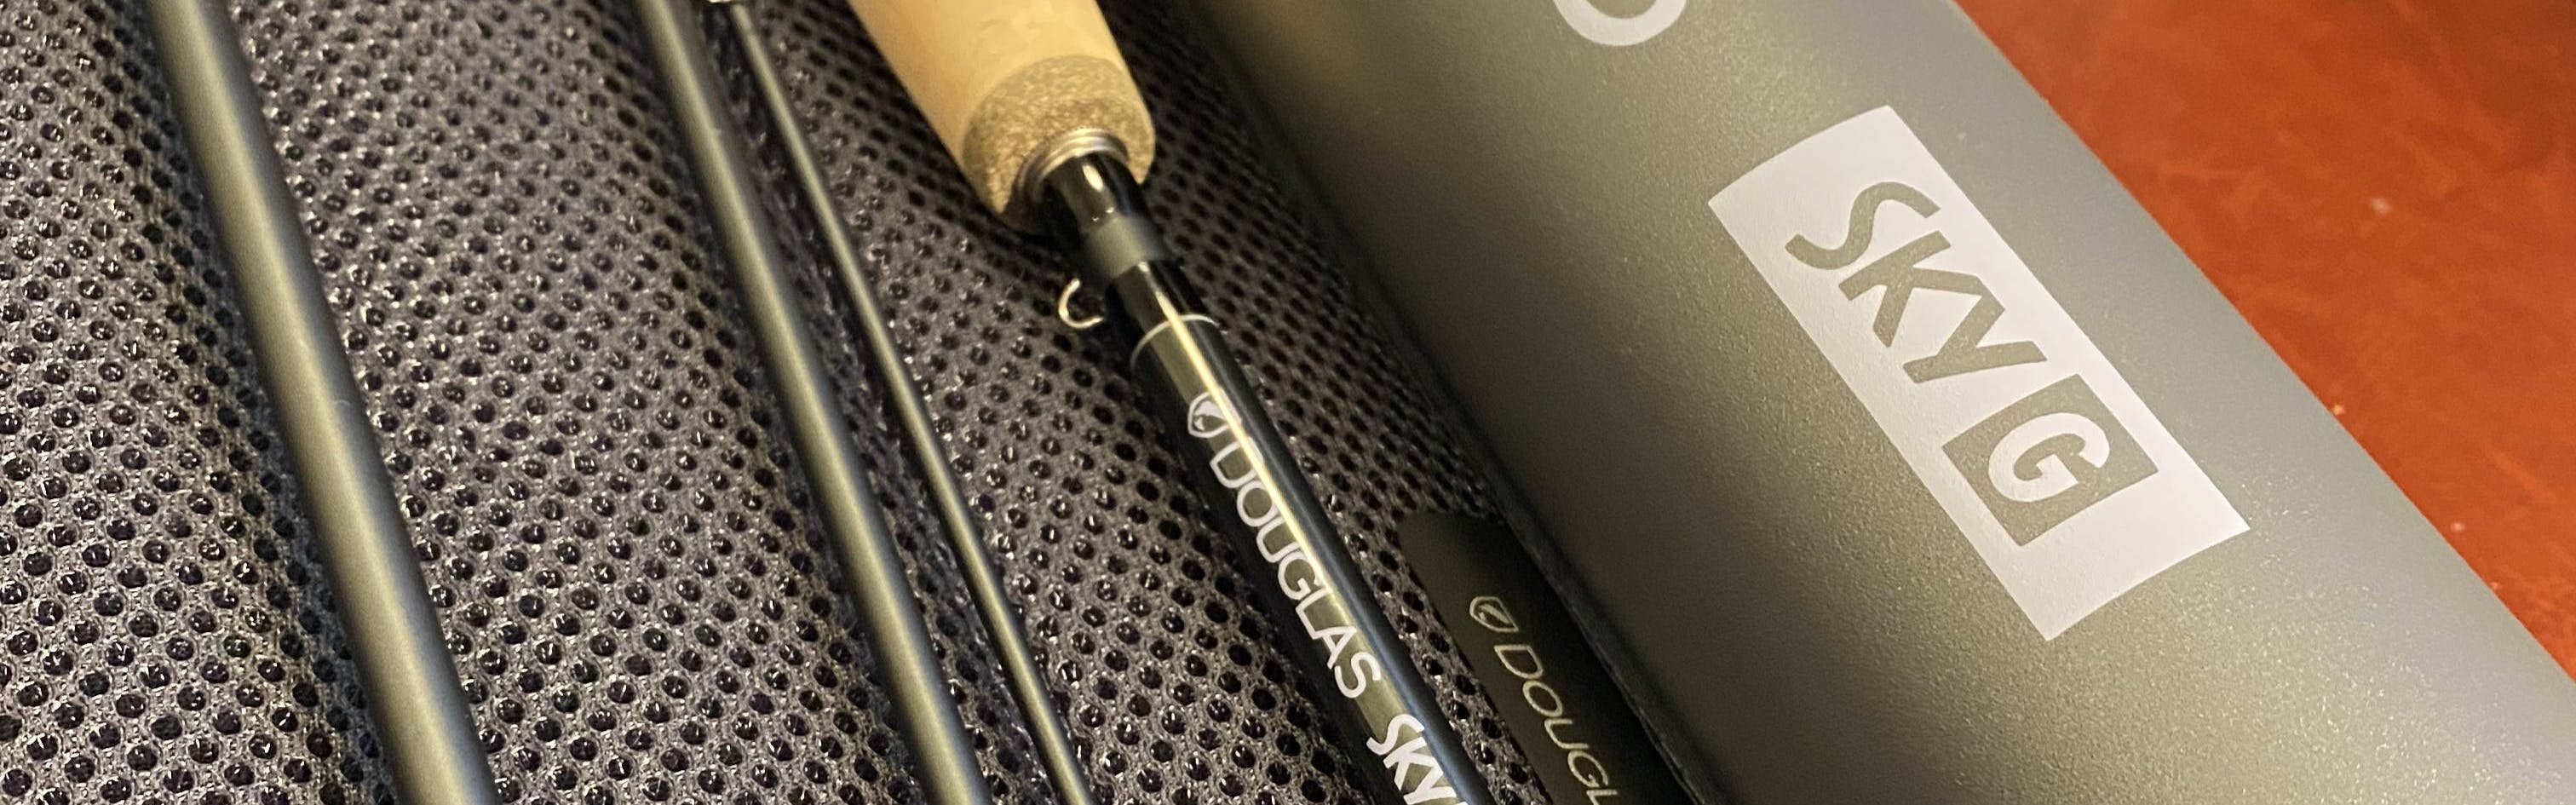 Close up of the Douglas SKY G Fly Rod in its case.